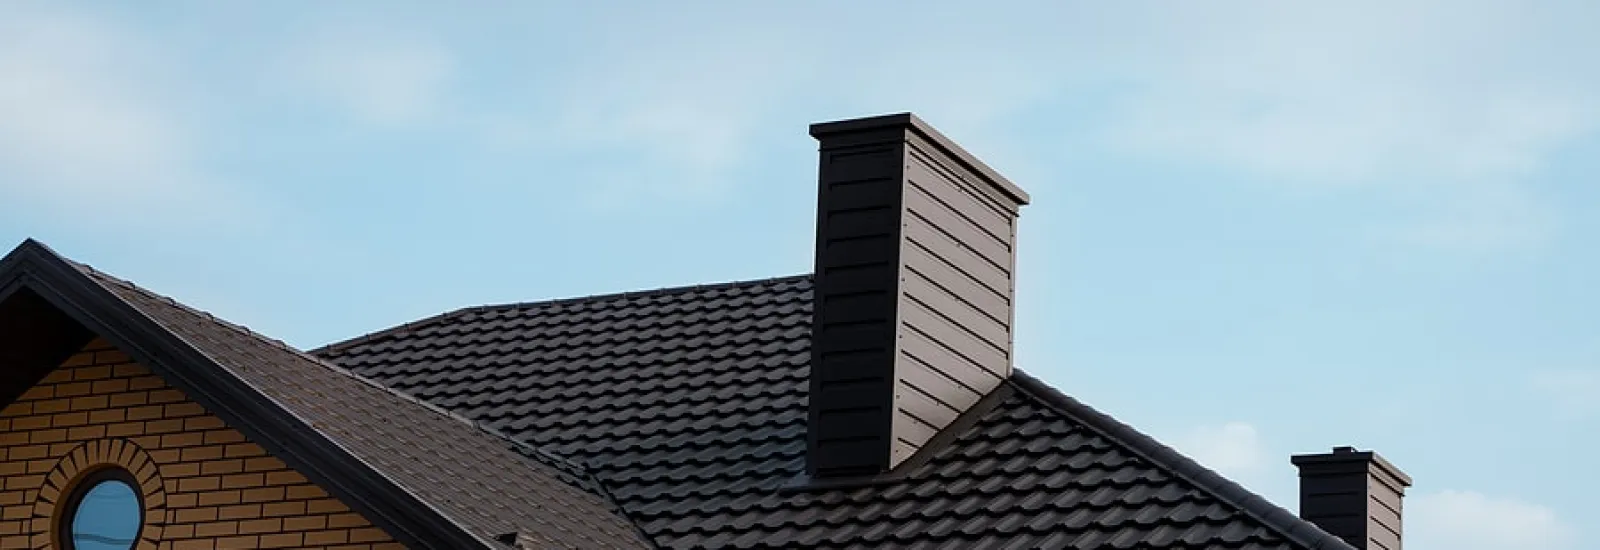 When to Call for Tile Roof Repair: 5 Warning Signs